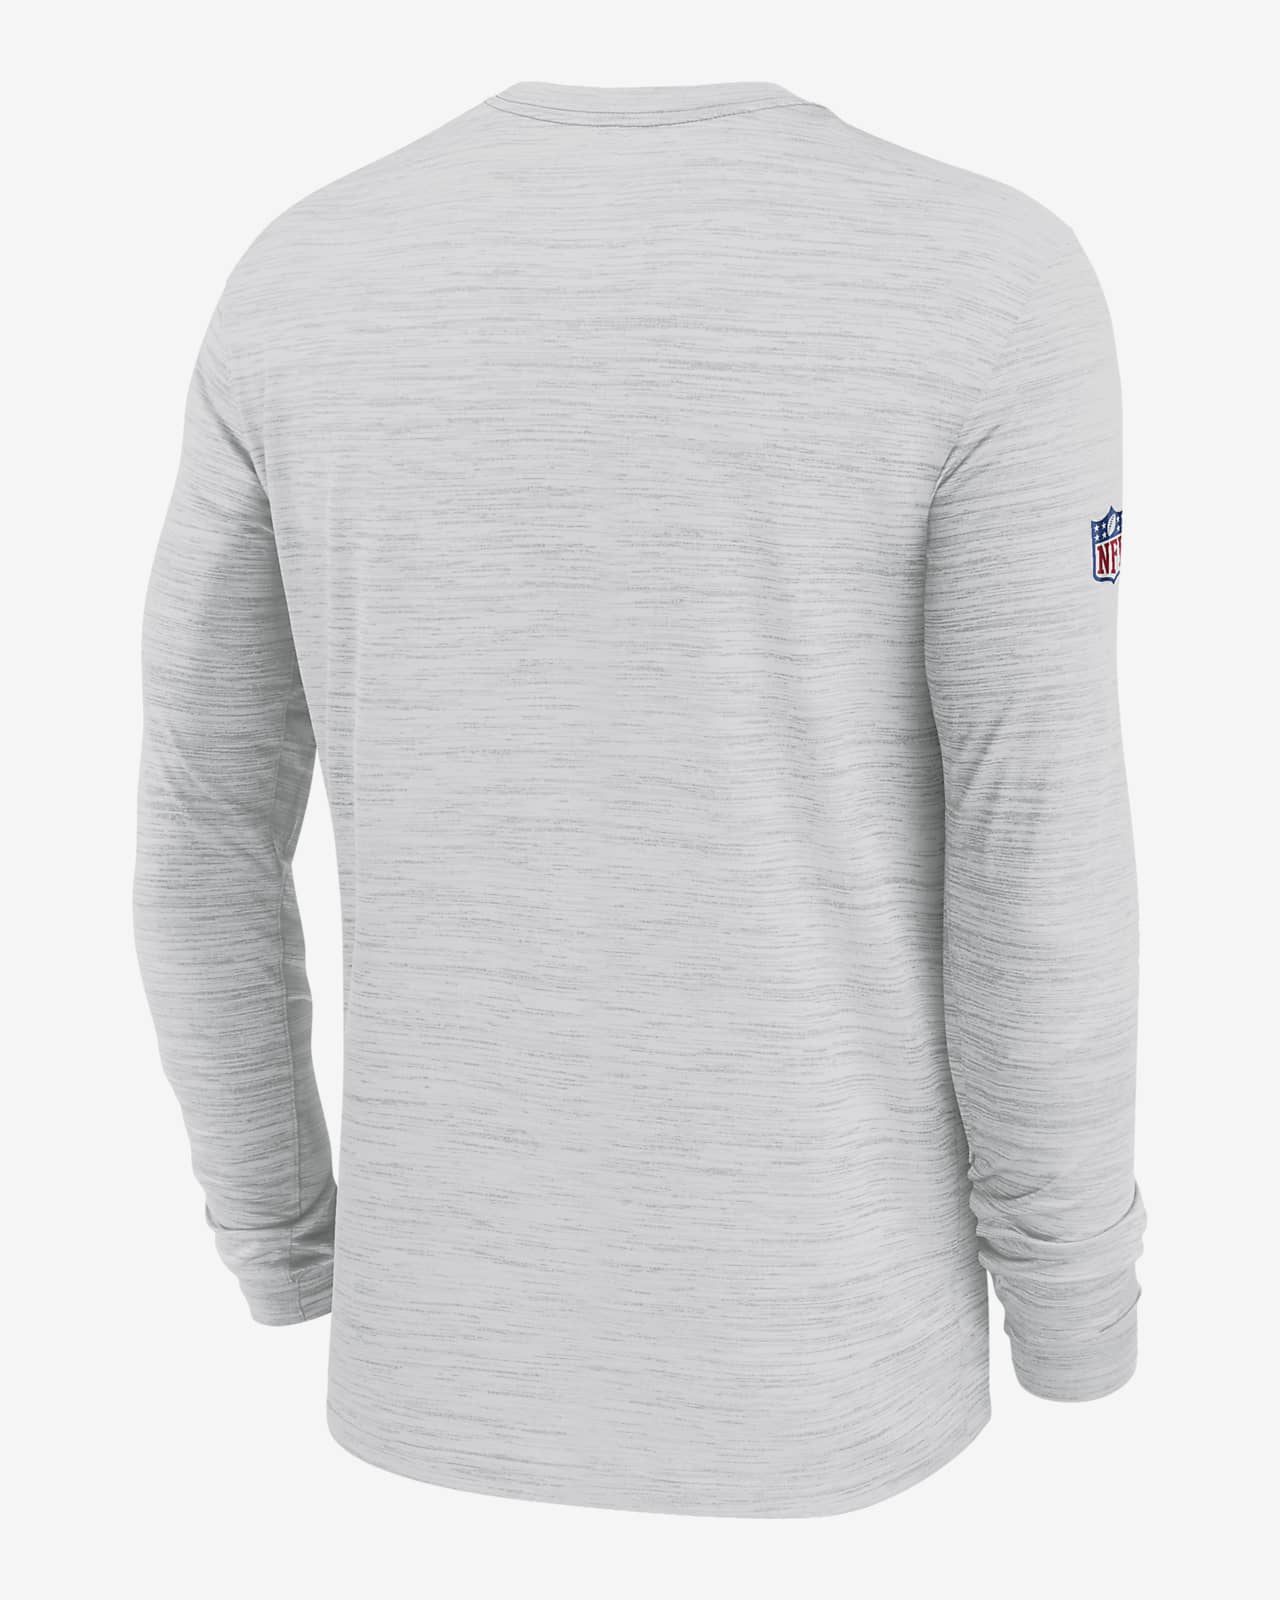 Nike Dri-FIT Velocity Athletic Stack (NFL New England Patriots) Men's  Long-Sleeve T-Shirt.